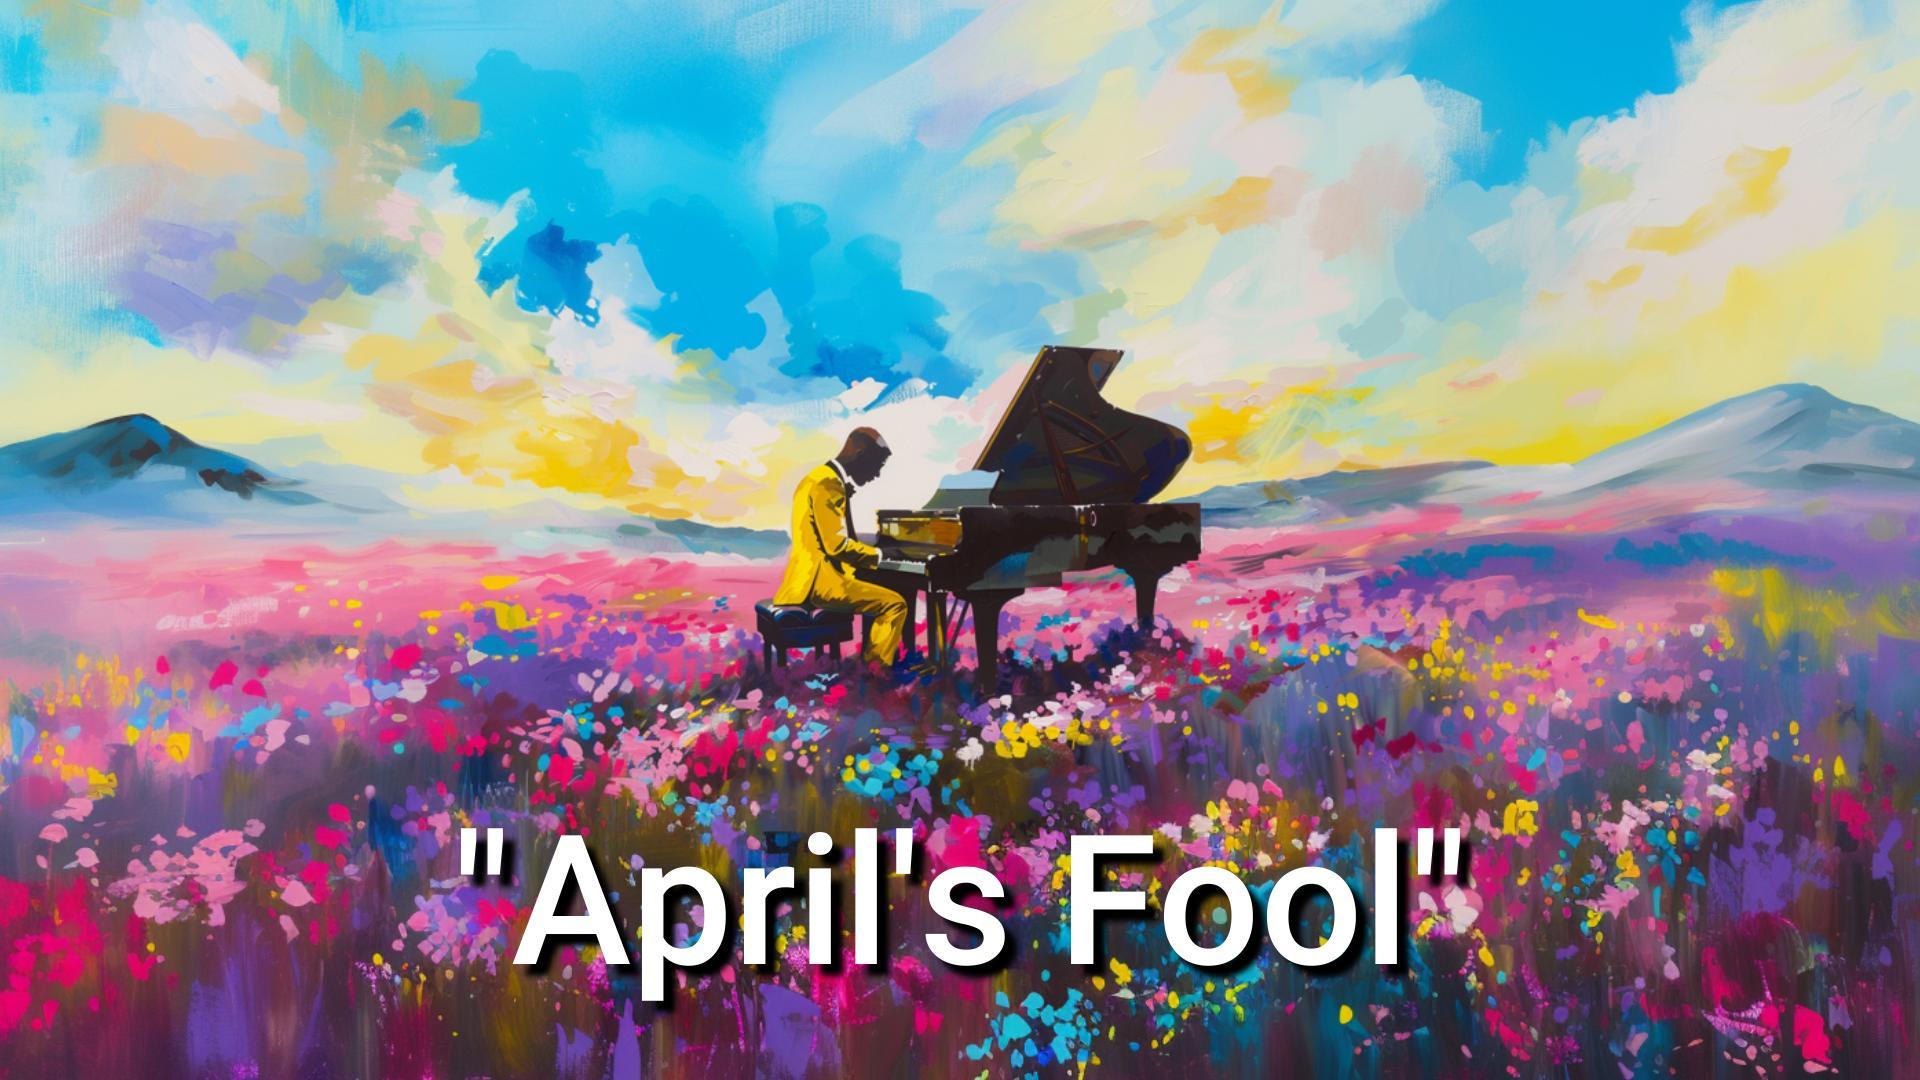 April’s Fool | AI Song YouTube Video